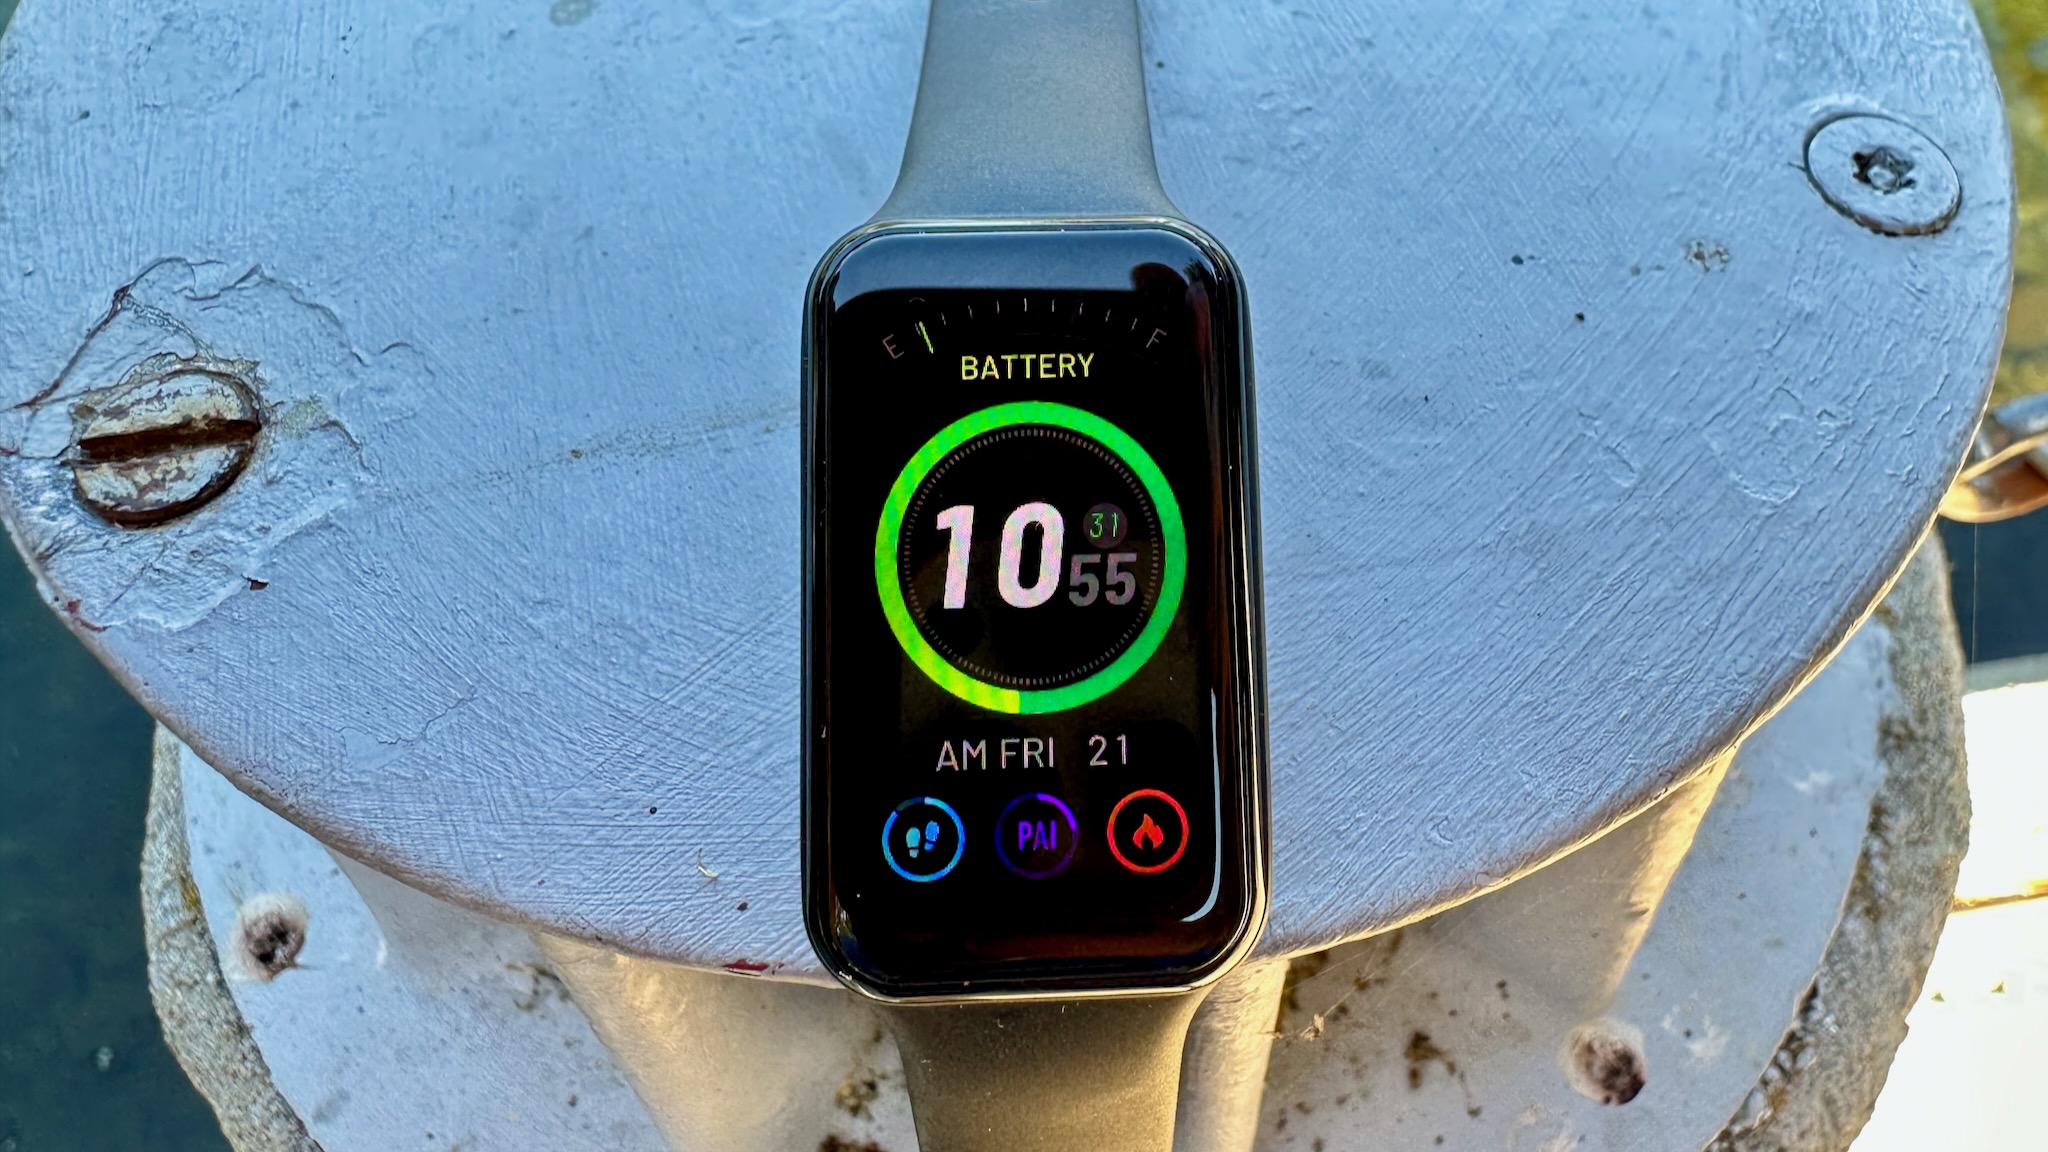 An Amazfit Band 7 showing a low battery, daily steps, PAI score, and intensity minutes on a watch face.